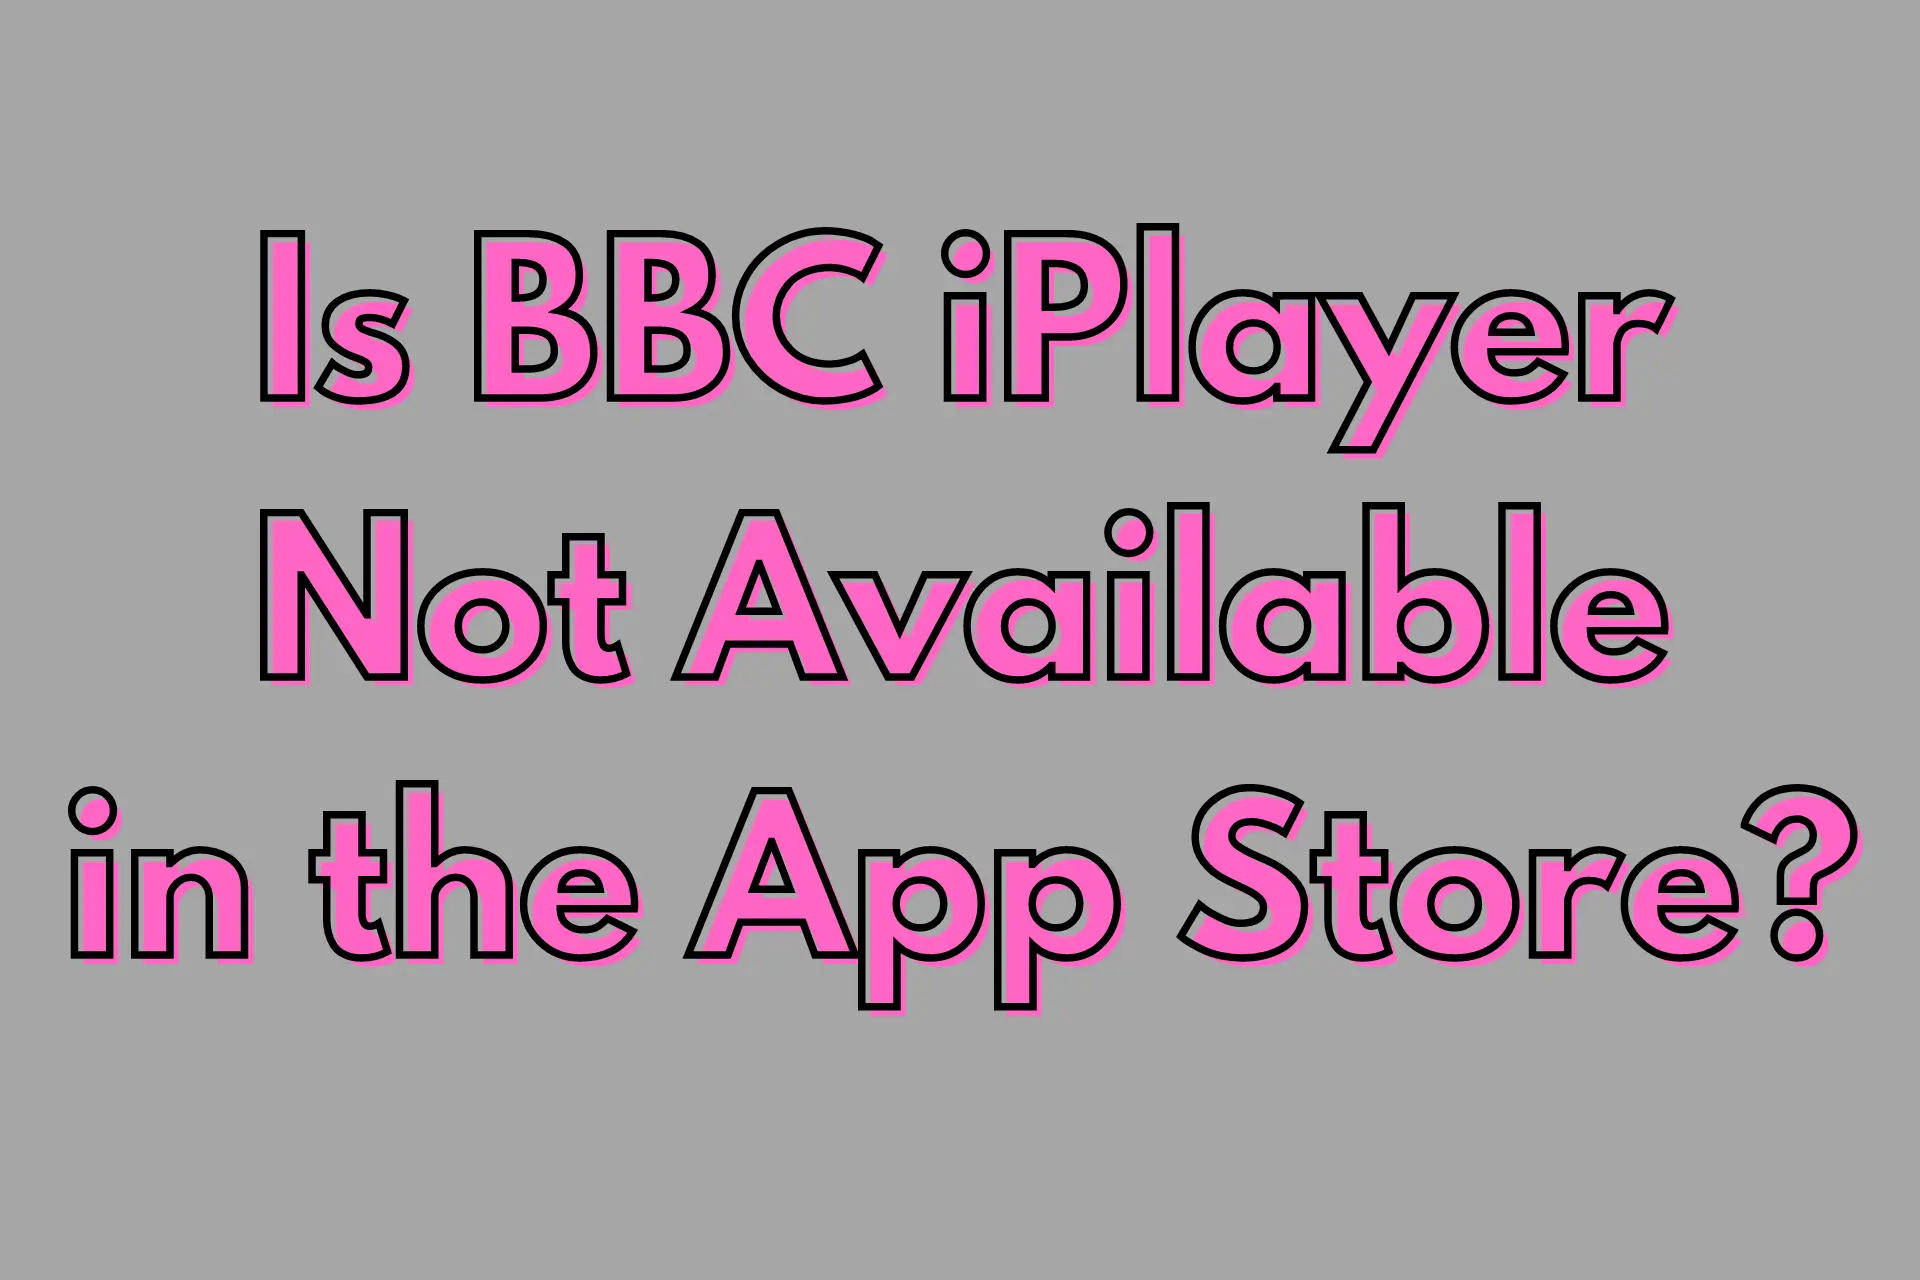 BBC iPlayer not available in the App Store